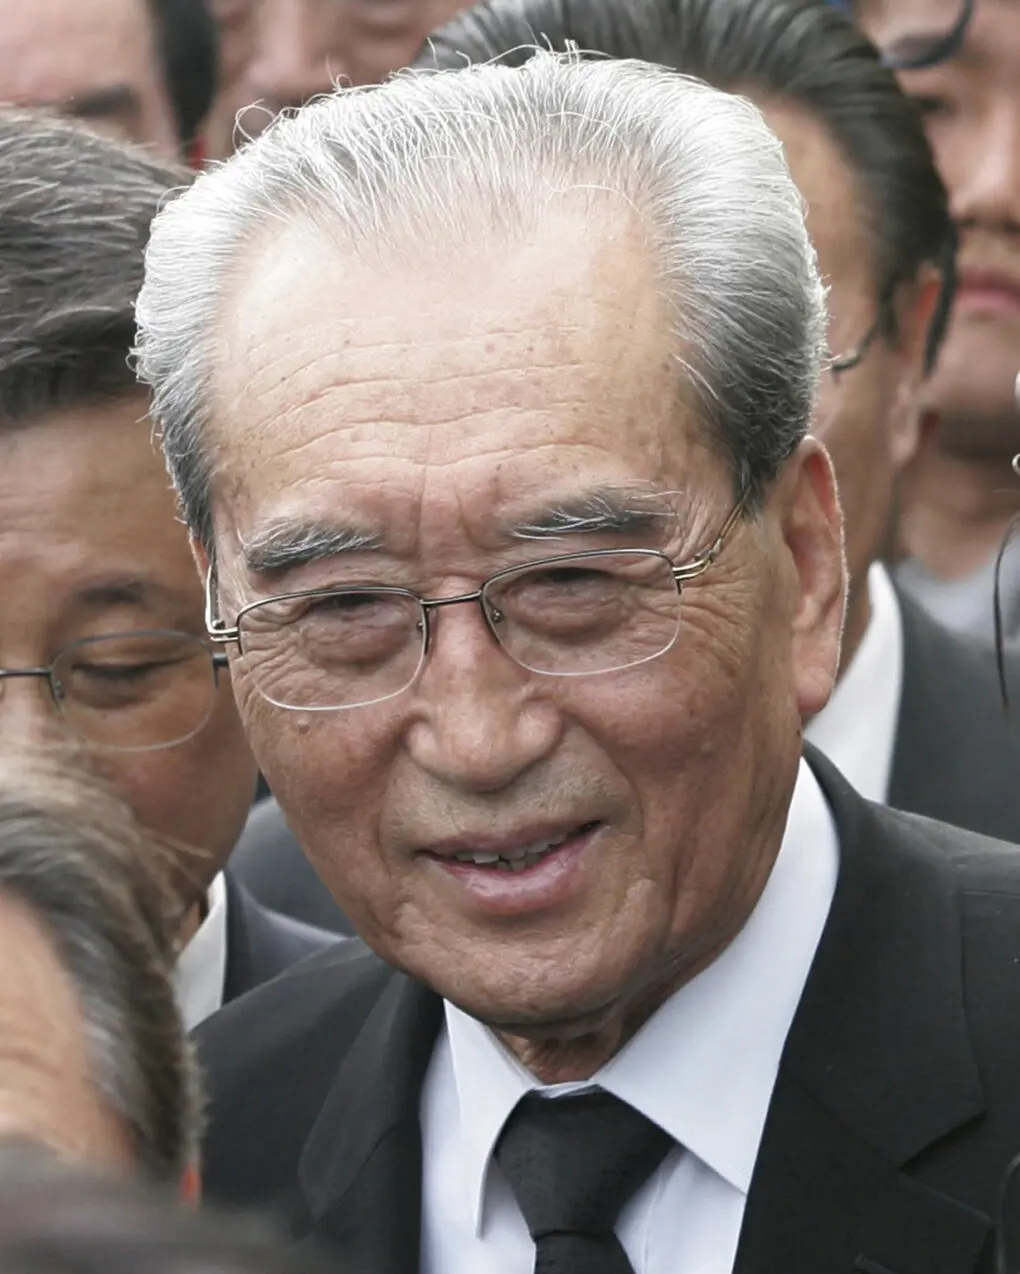 LA Post: The North Korean official whose propaganda helped build the Kim dynasty dies at 94